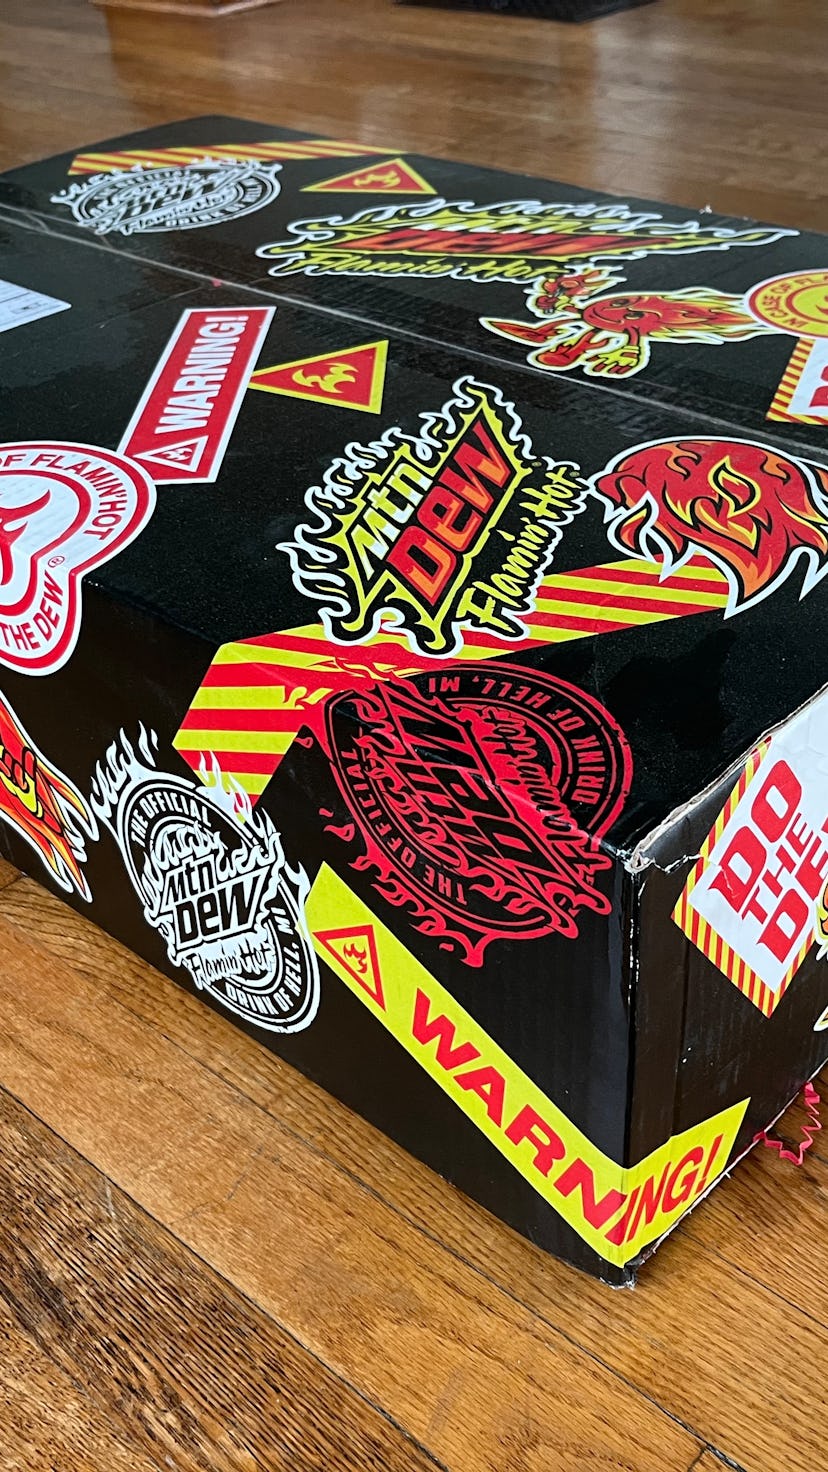 Promotional box of Flamin Hot Mountain Dew on wooden floor